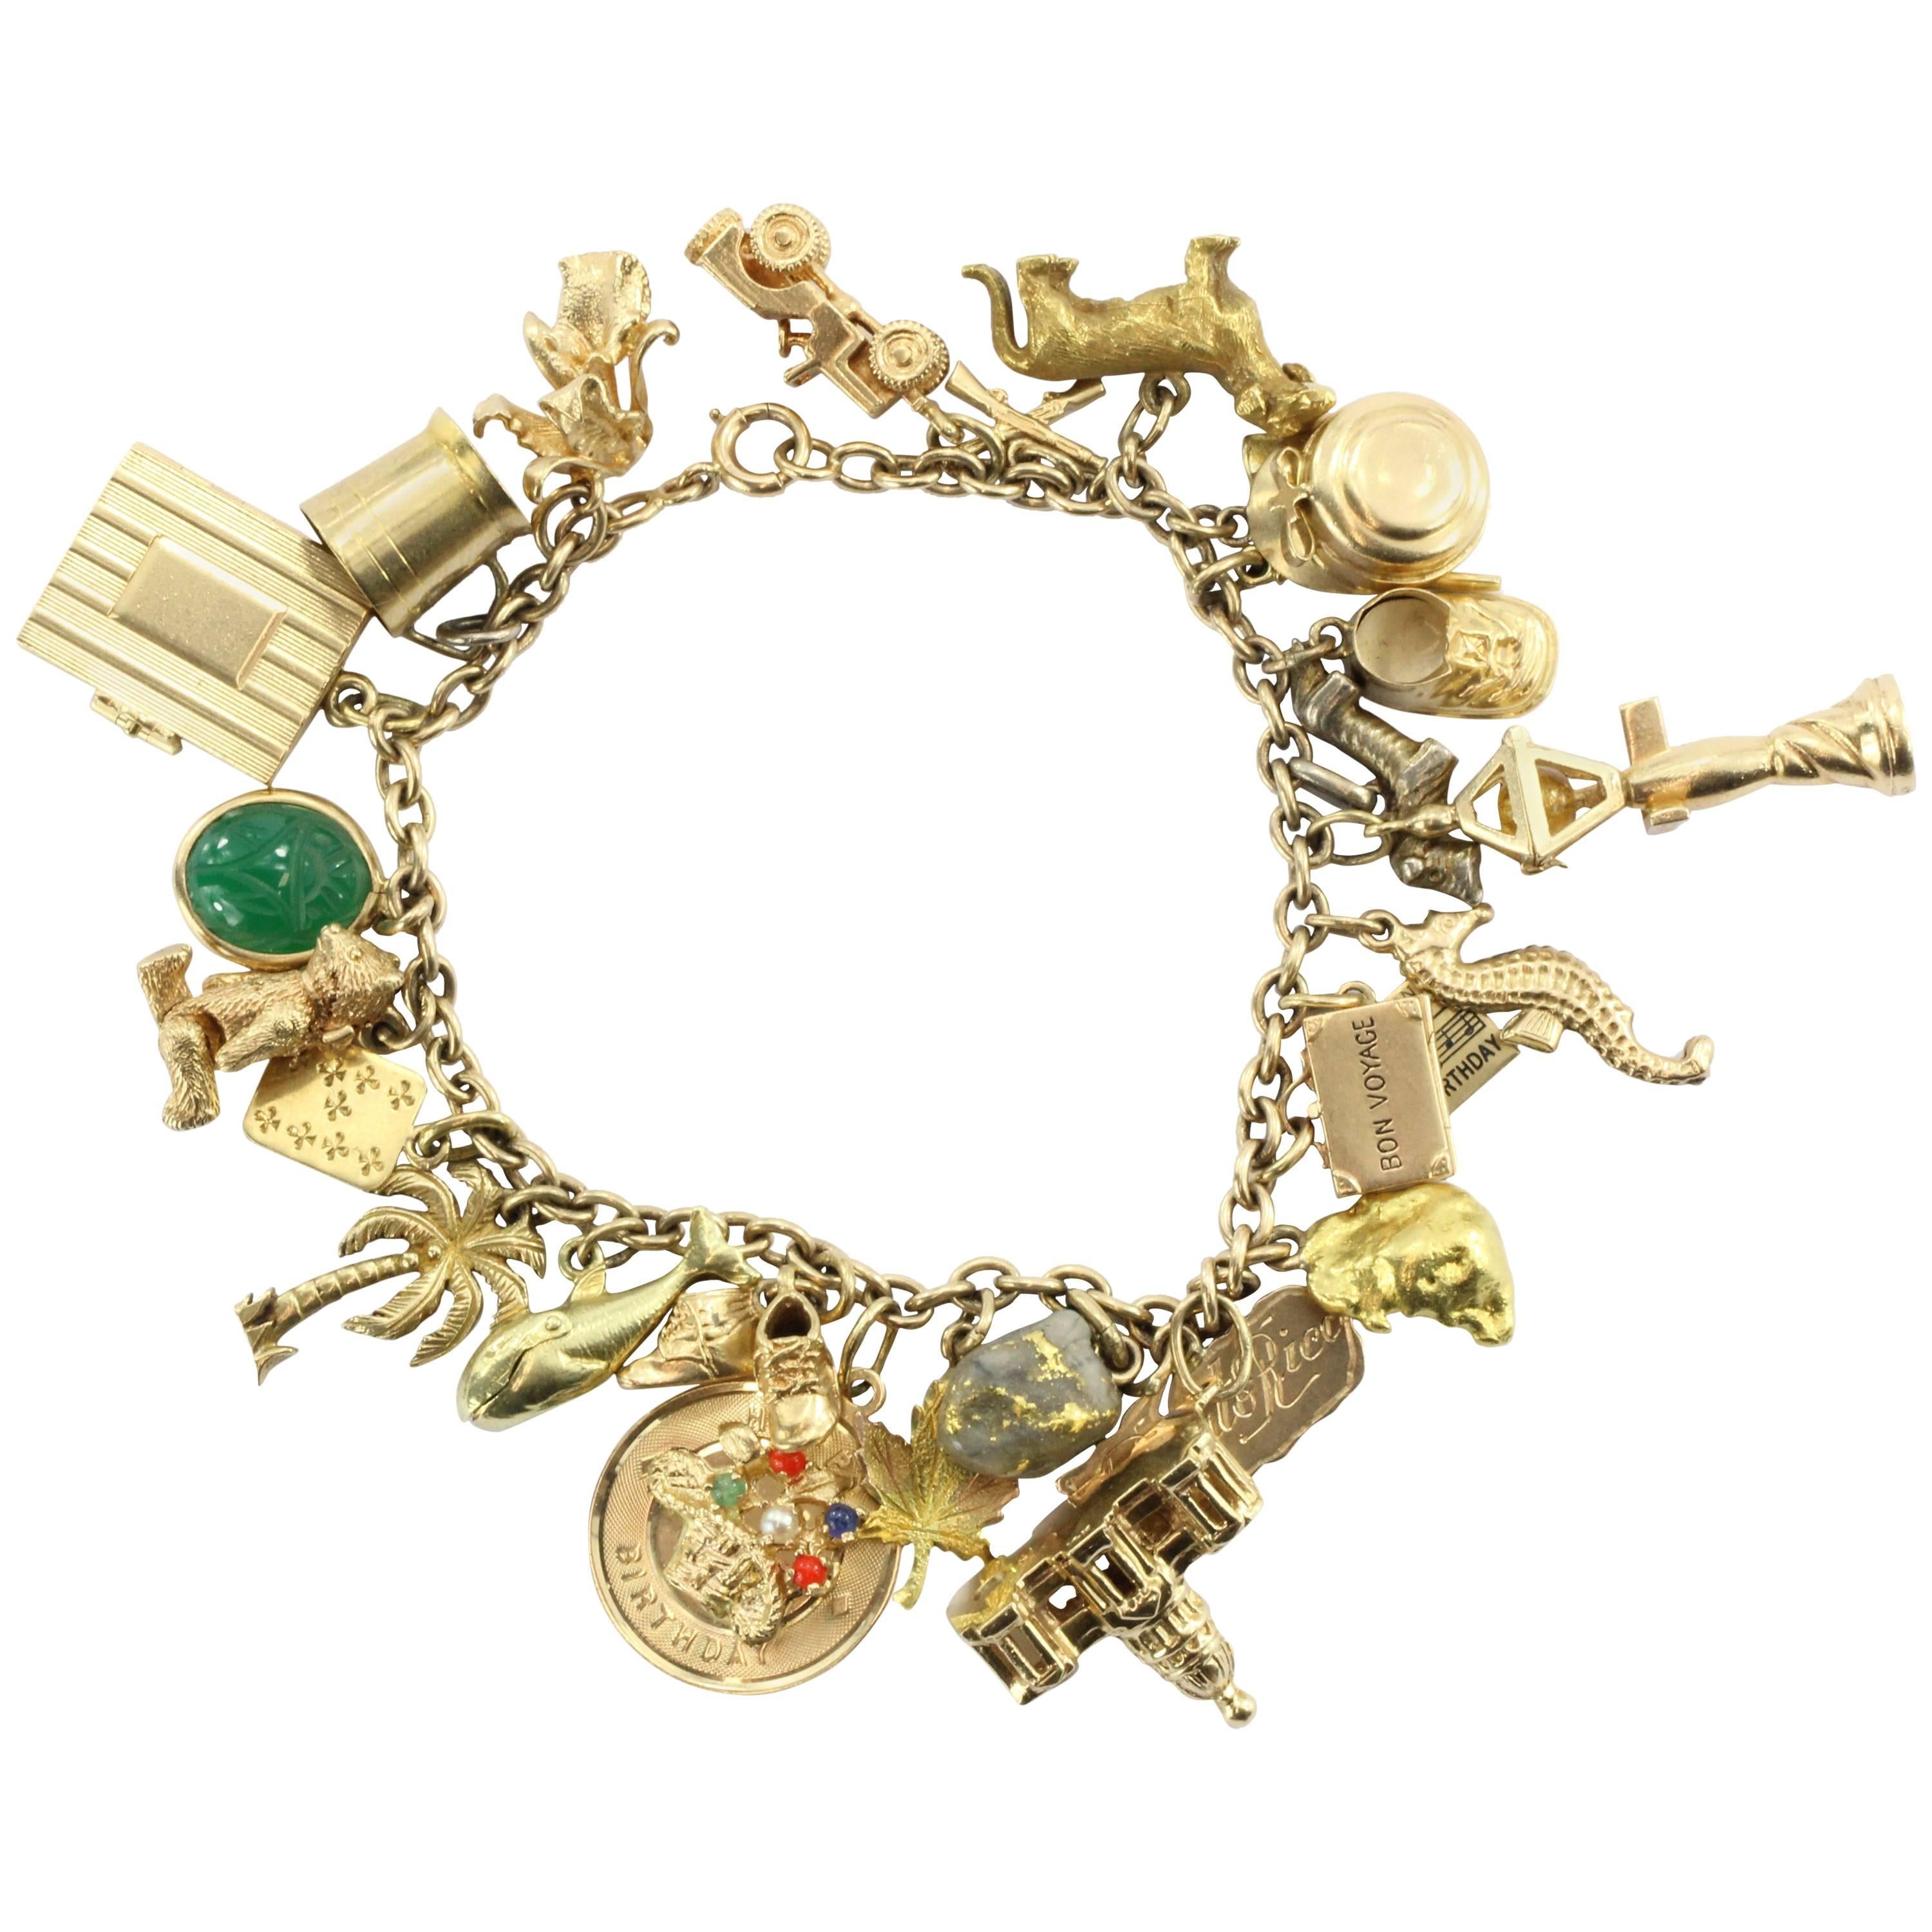 1940s Gold Charm Bracelet with Cartier and Tiffany & Co. Charms